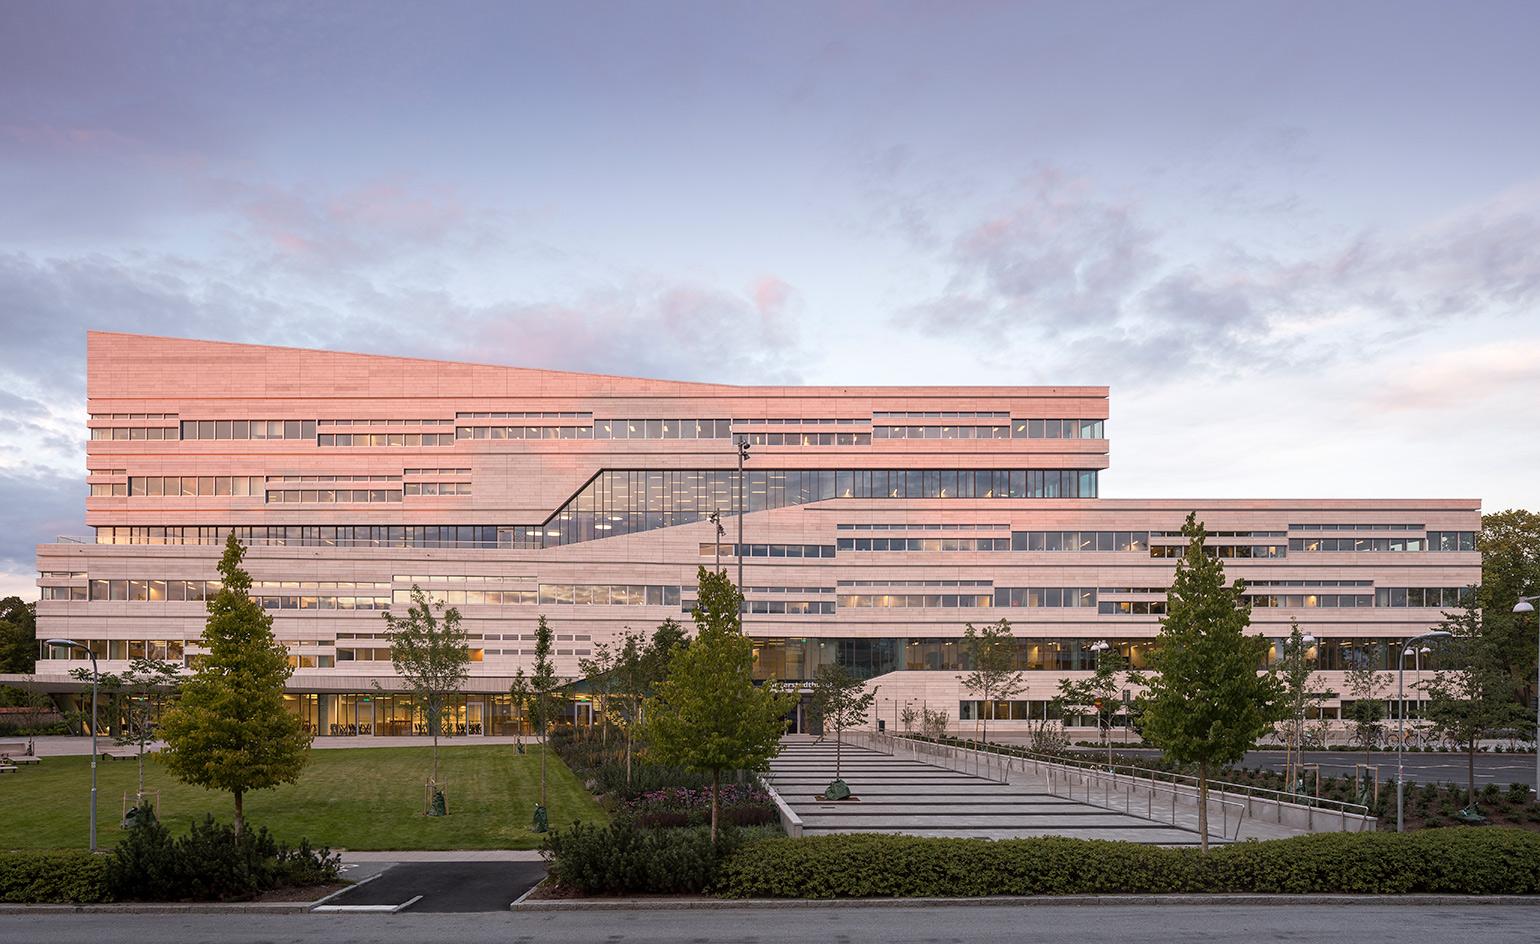 New university buildings are a lesson in architecture. Wallpaper*